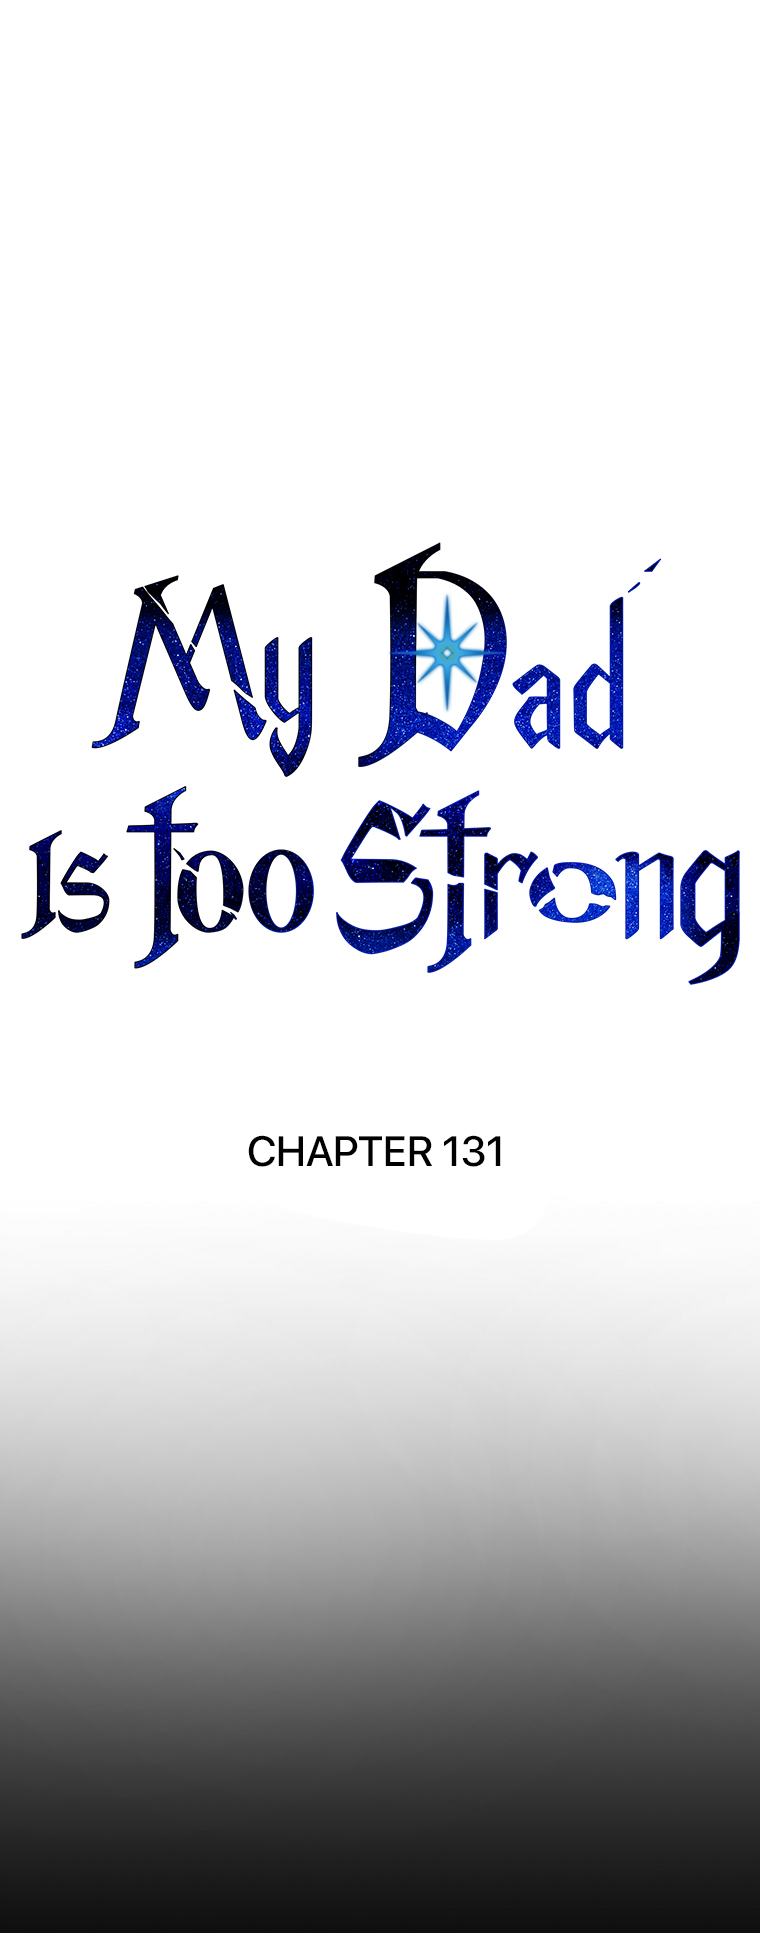 My Dad is Too Strong - Chapter 24903 - Image 1